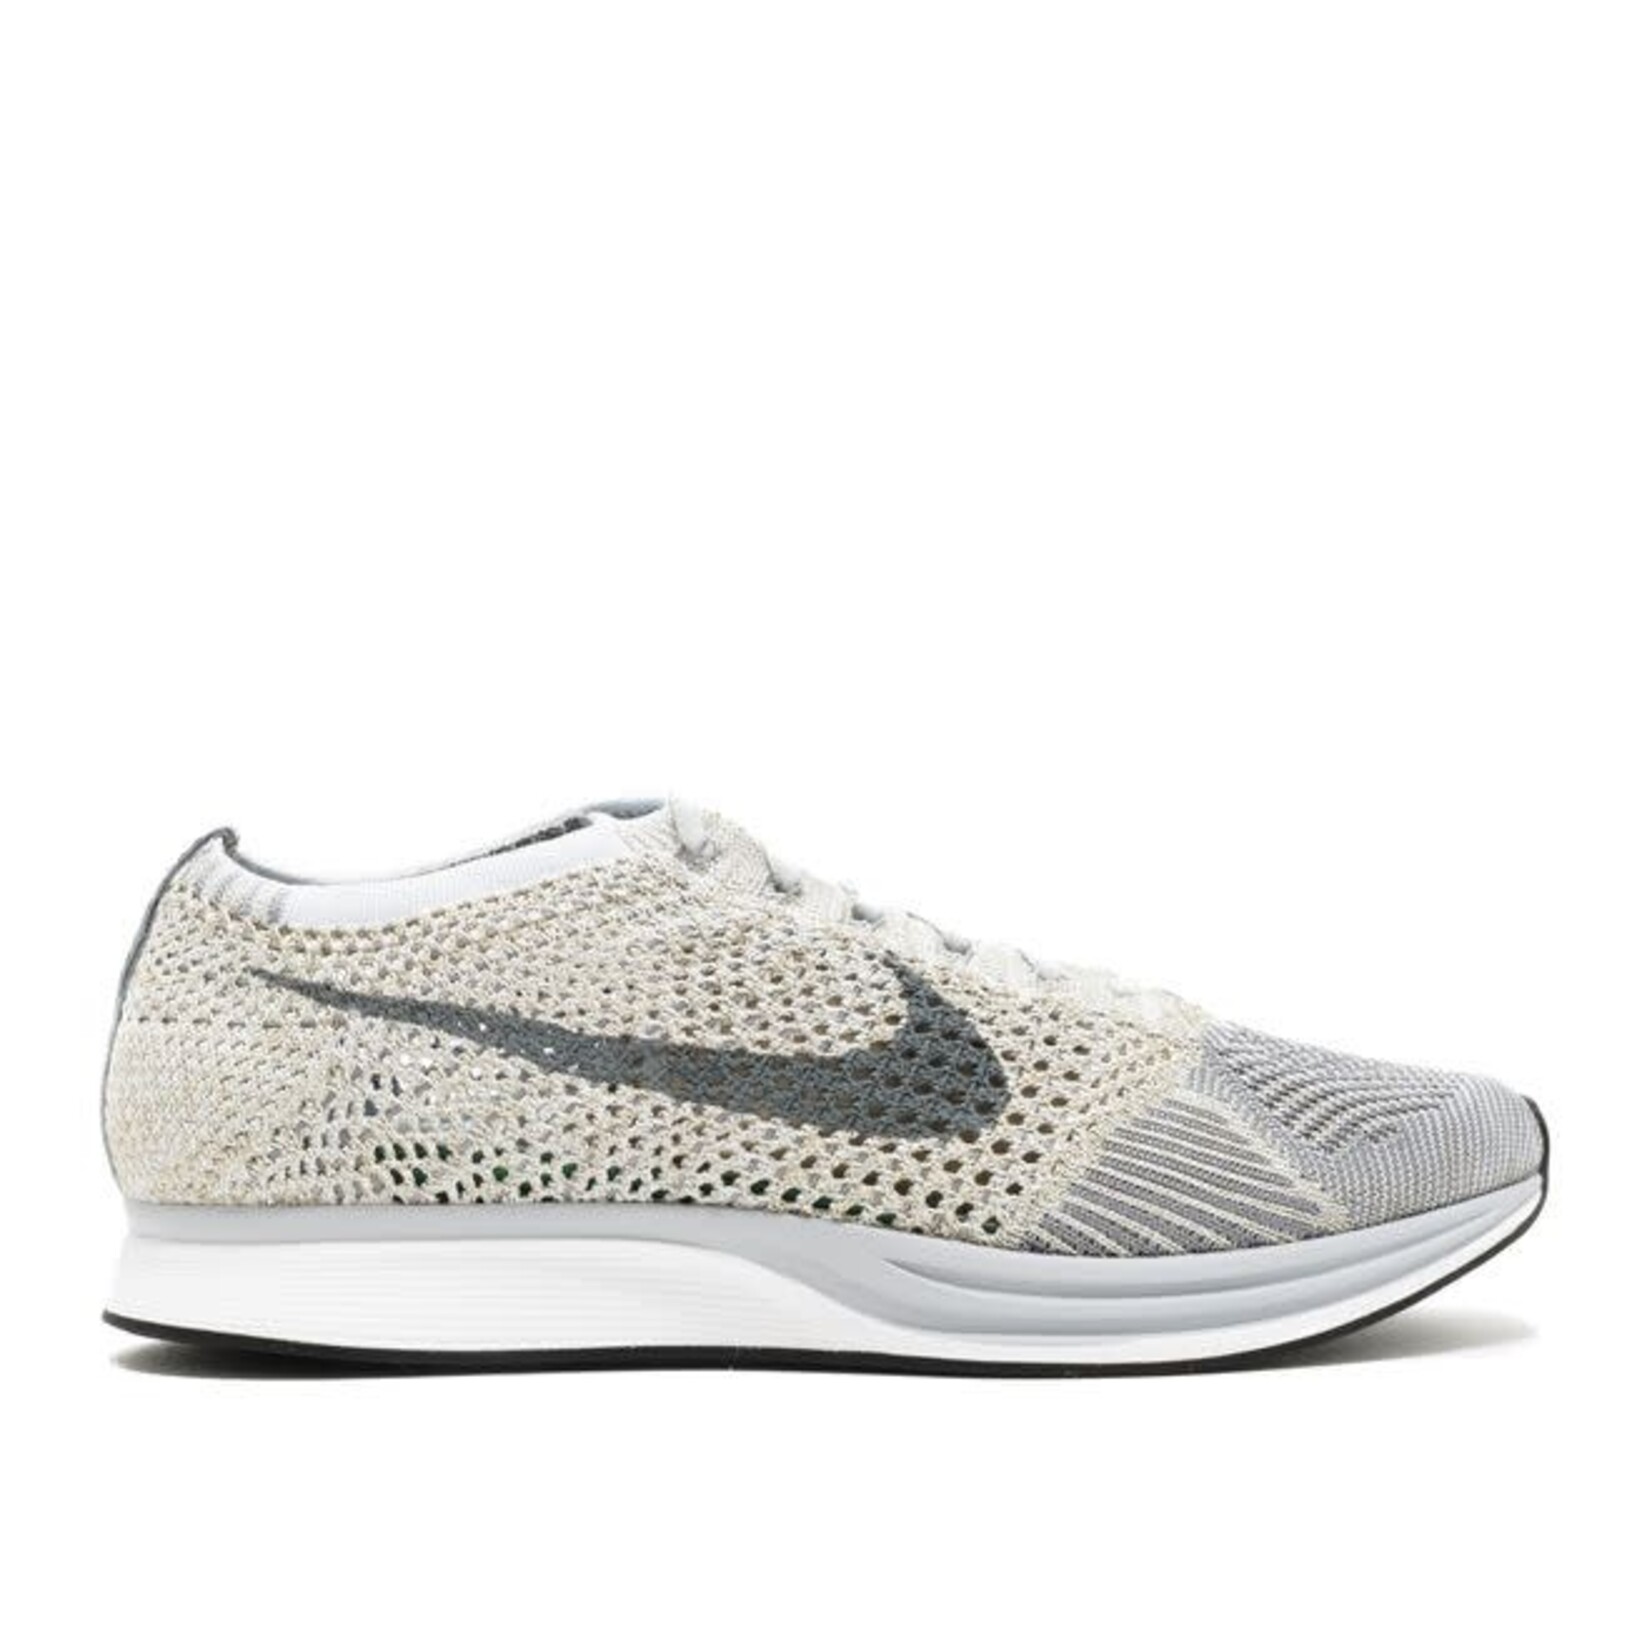 Nike Nike Flyknit Racer Pure Platinum Size 7, DS BRAND NEW